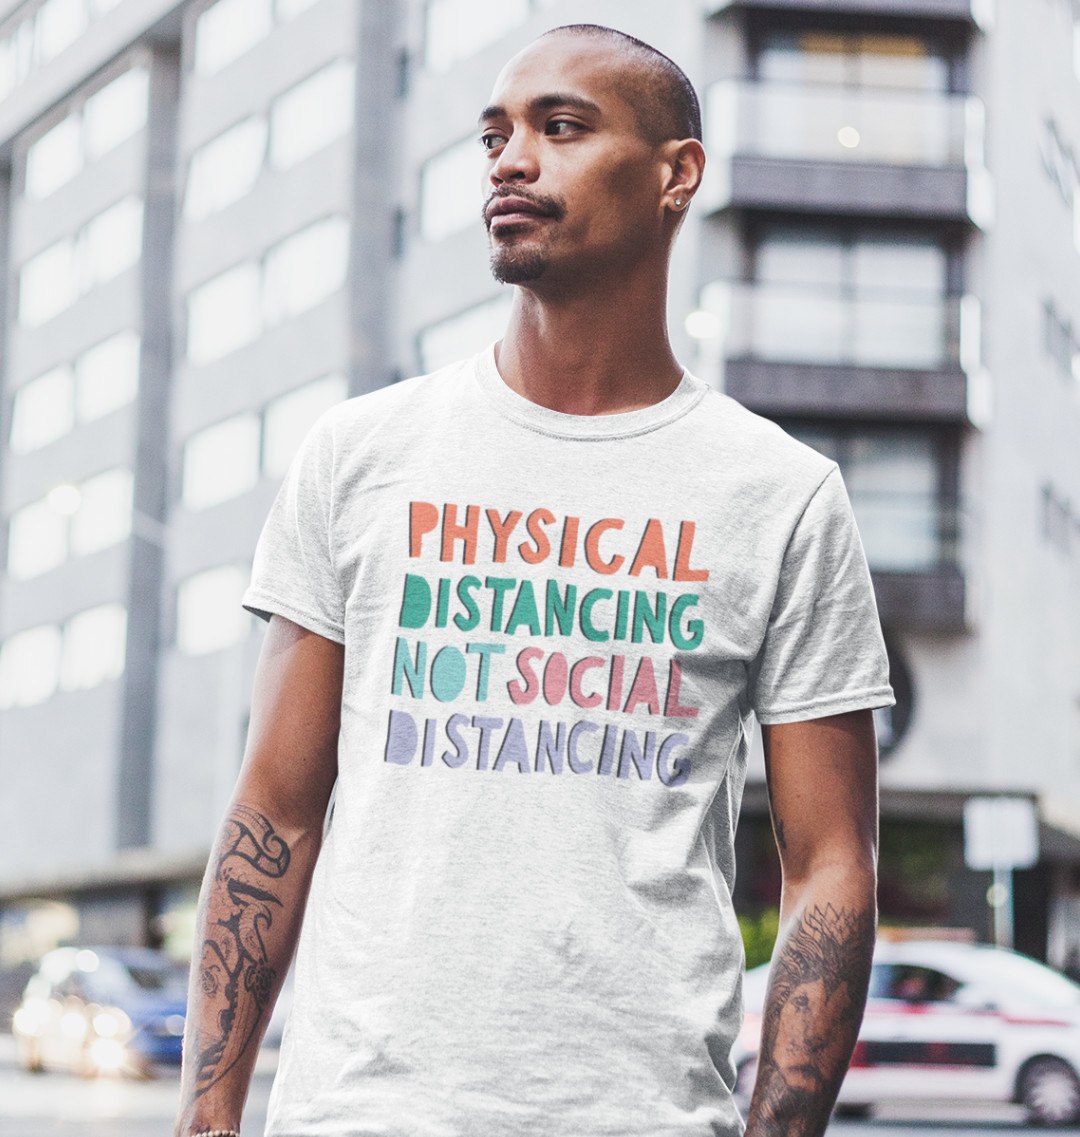 A young man wears a Mix t shirt that reads: "Physical distancing not social distancing"